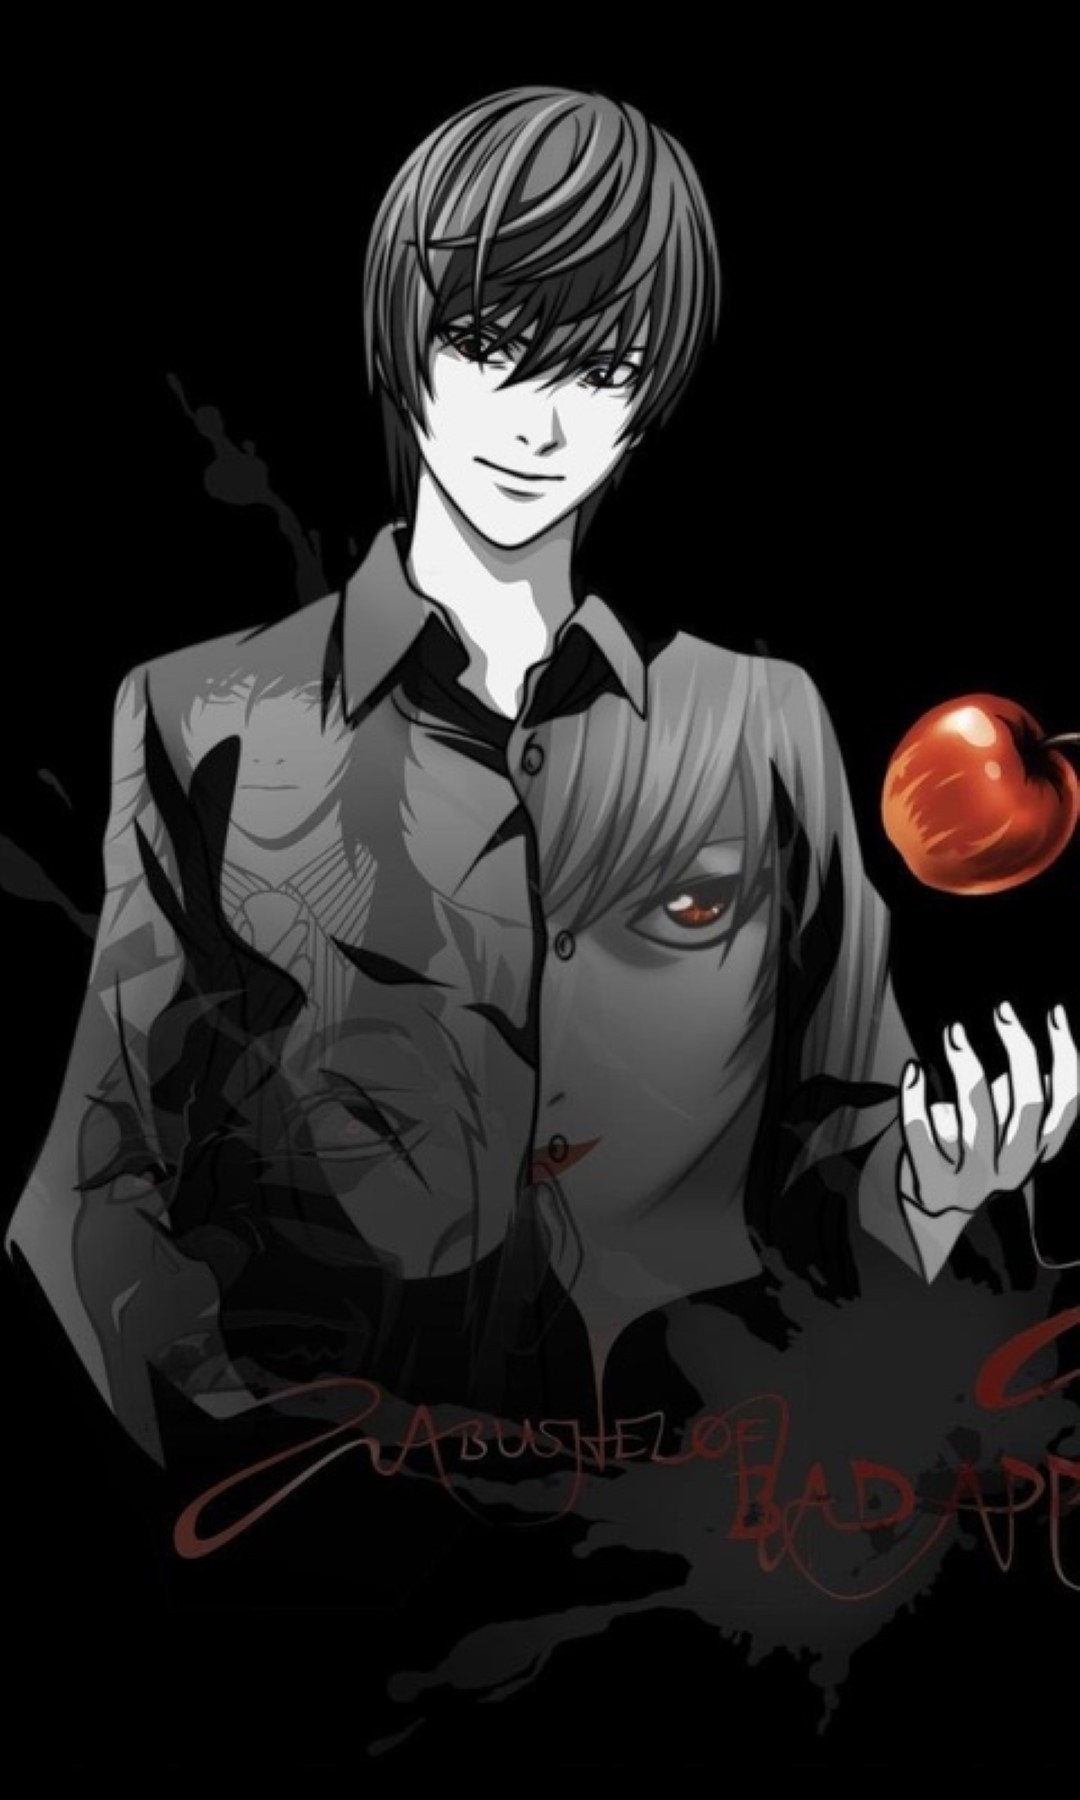 death note wallpaper iphone,cartoon,anime,illustration,black hair,fictional character